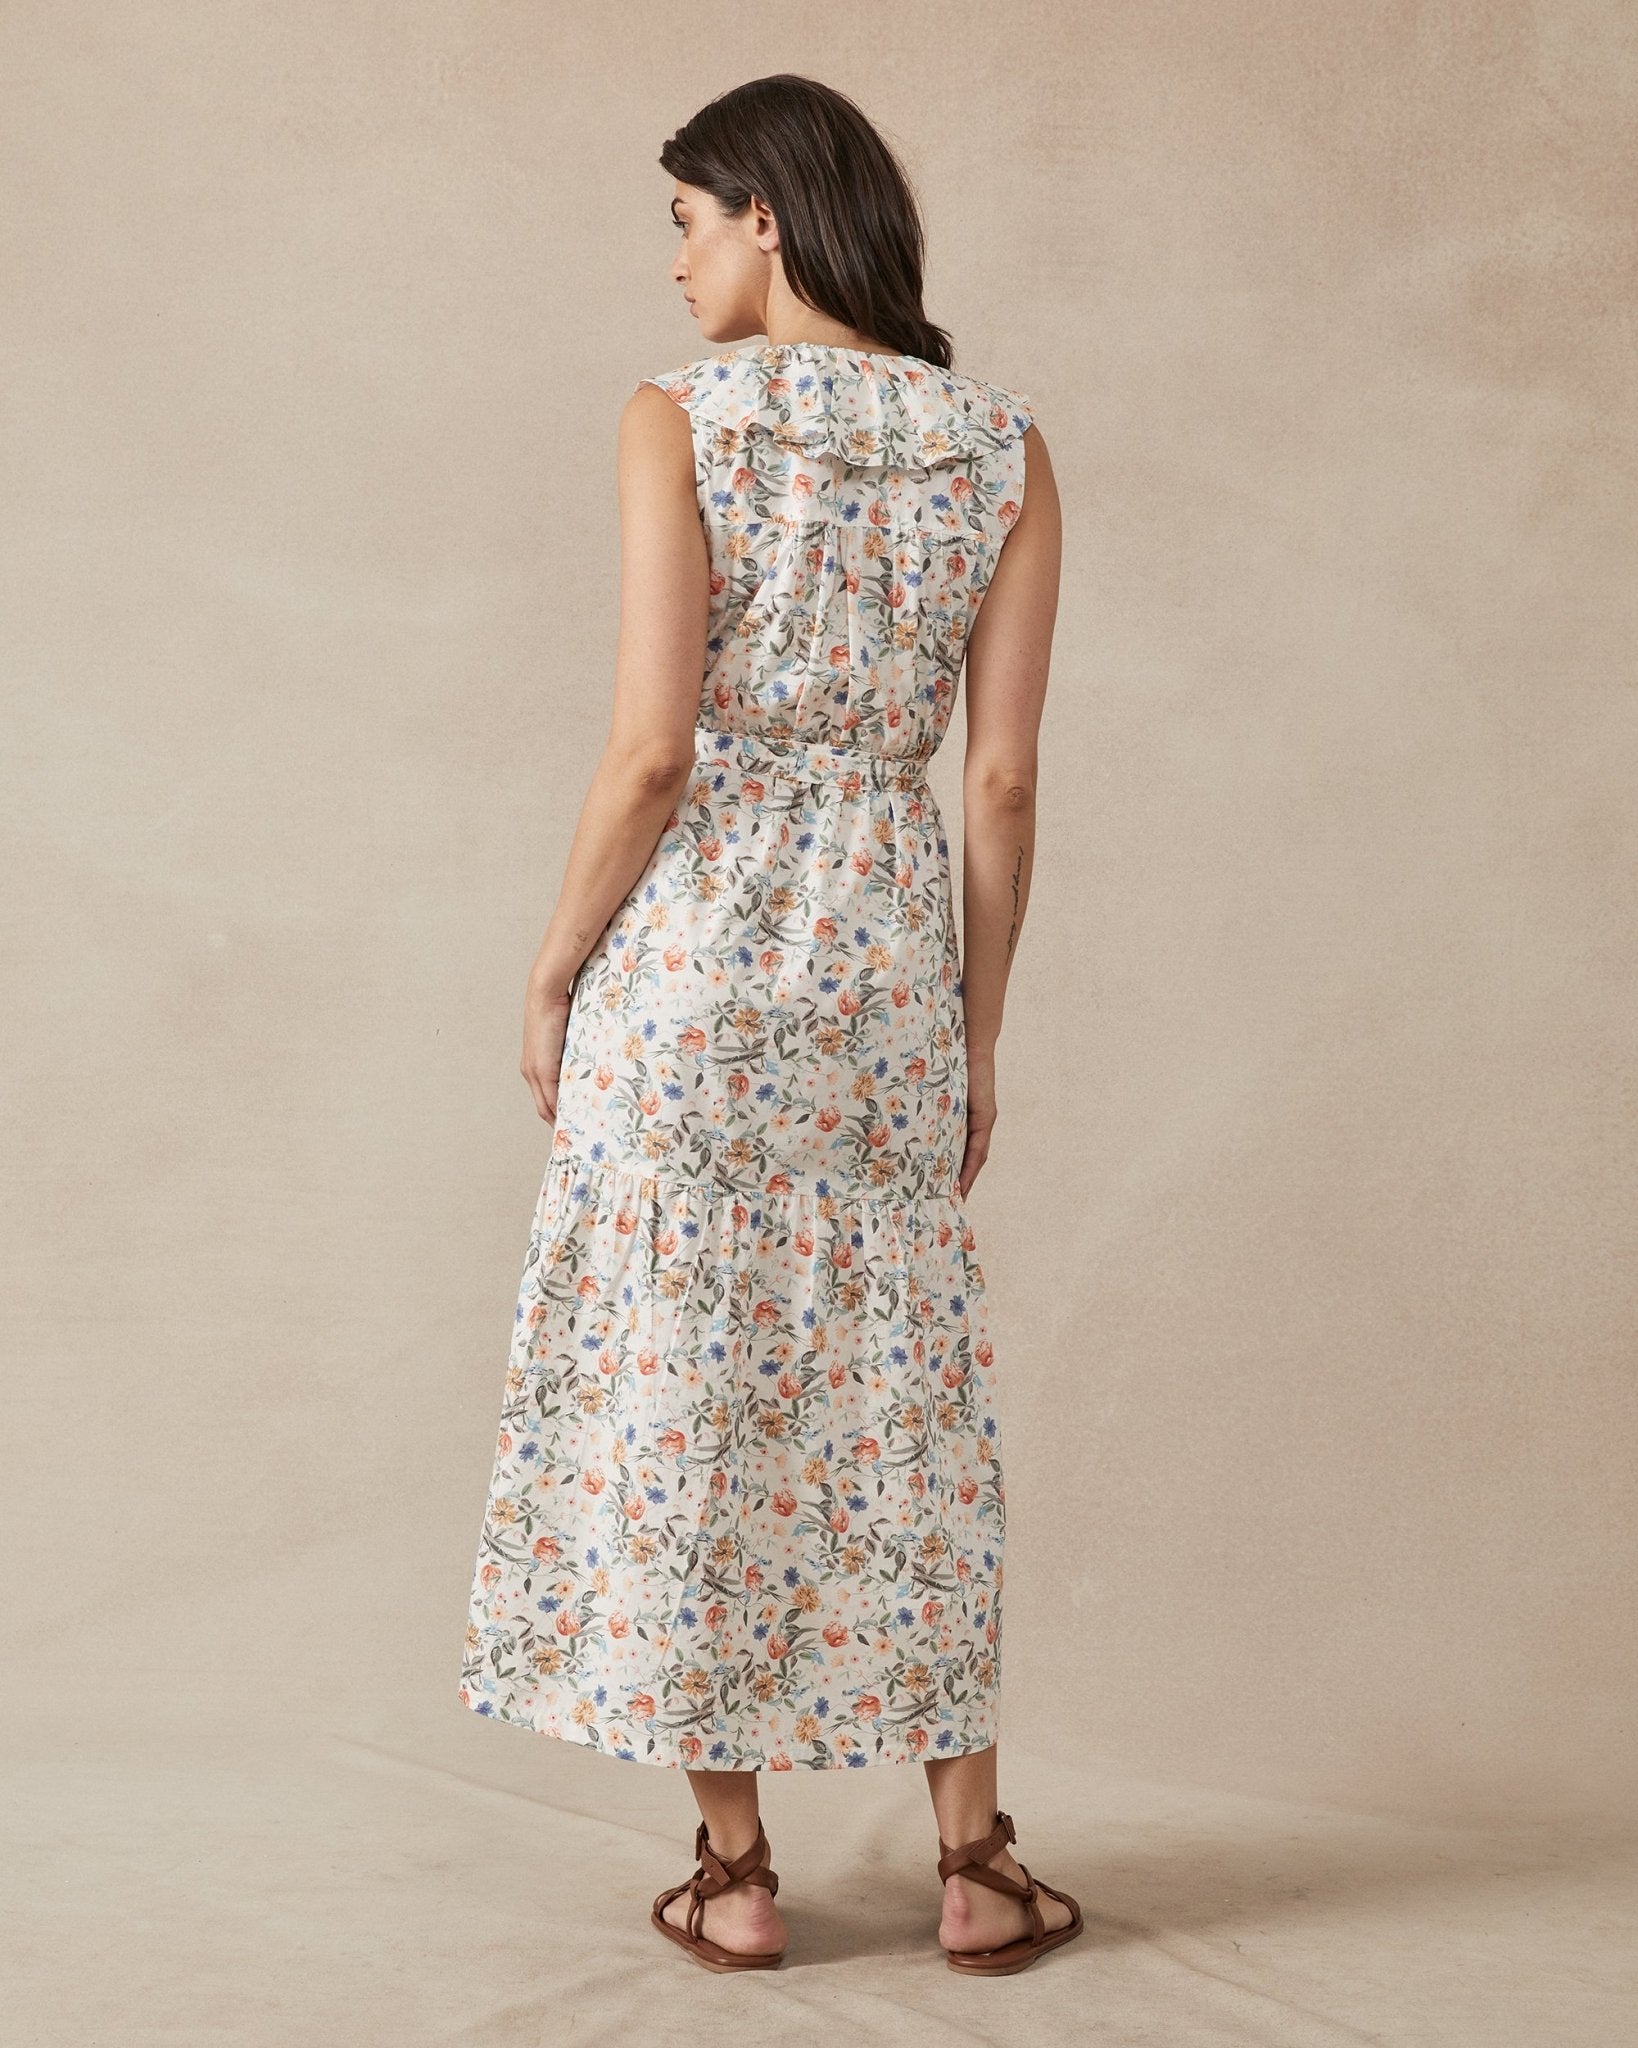 Shop Patty Dress in Rhapsody Floral by Maggie The Label - Maggie The Label